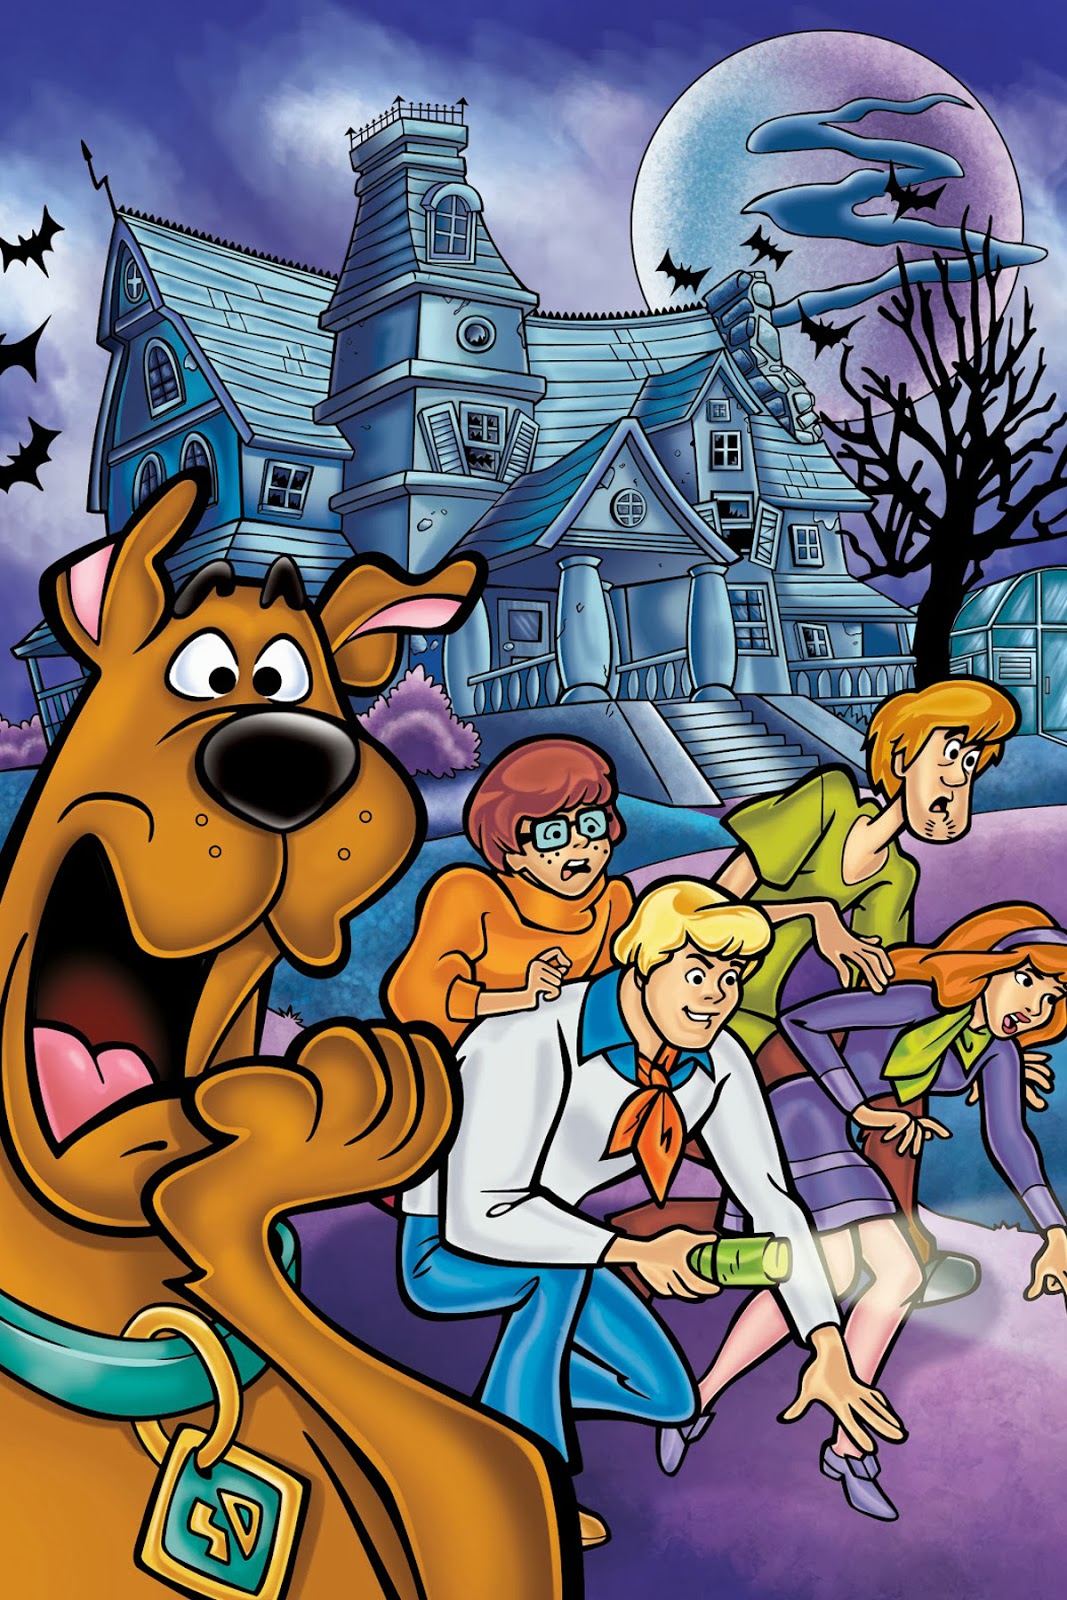 Scooby Doo HD Wallpaper 1080p High Definition